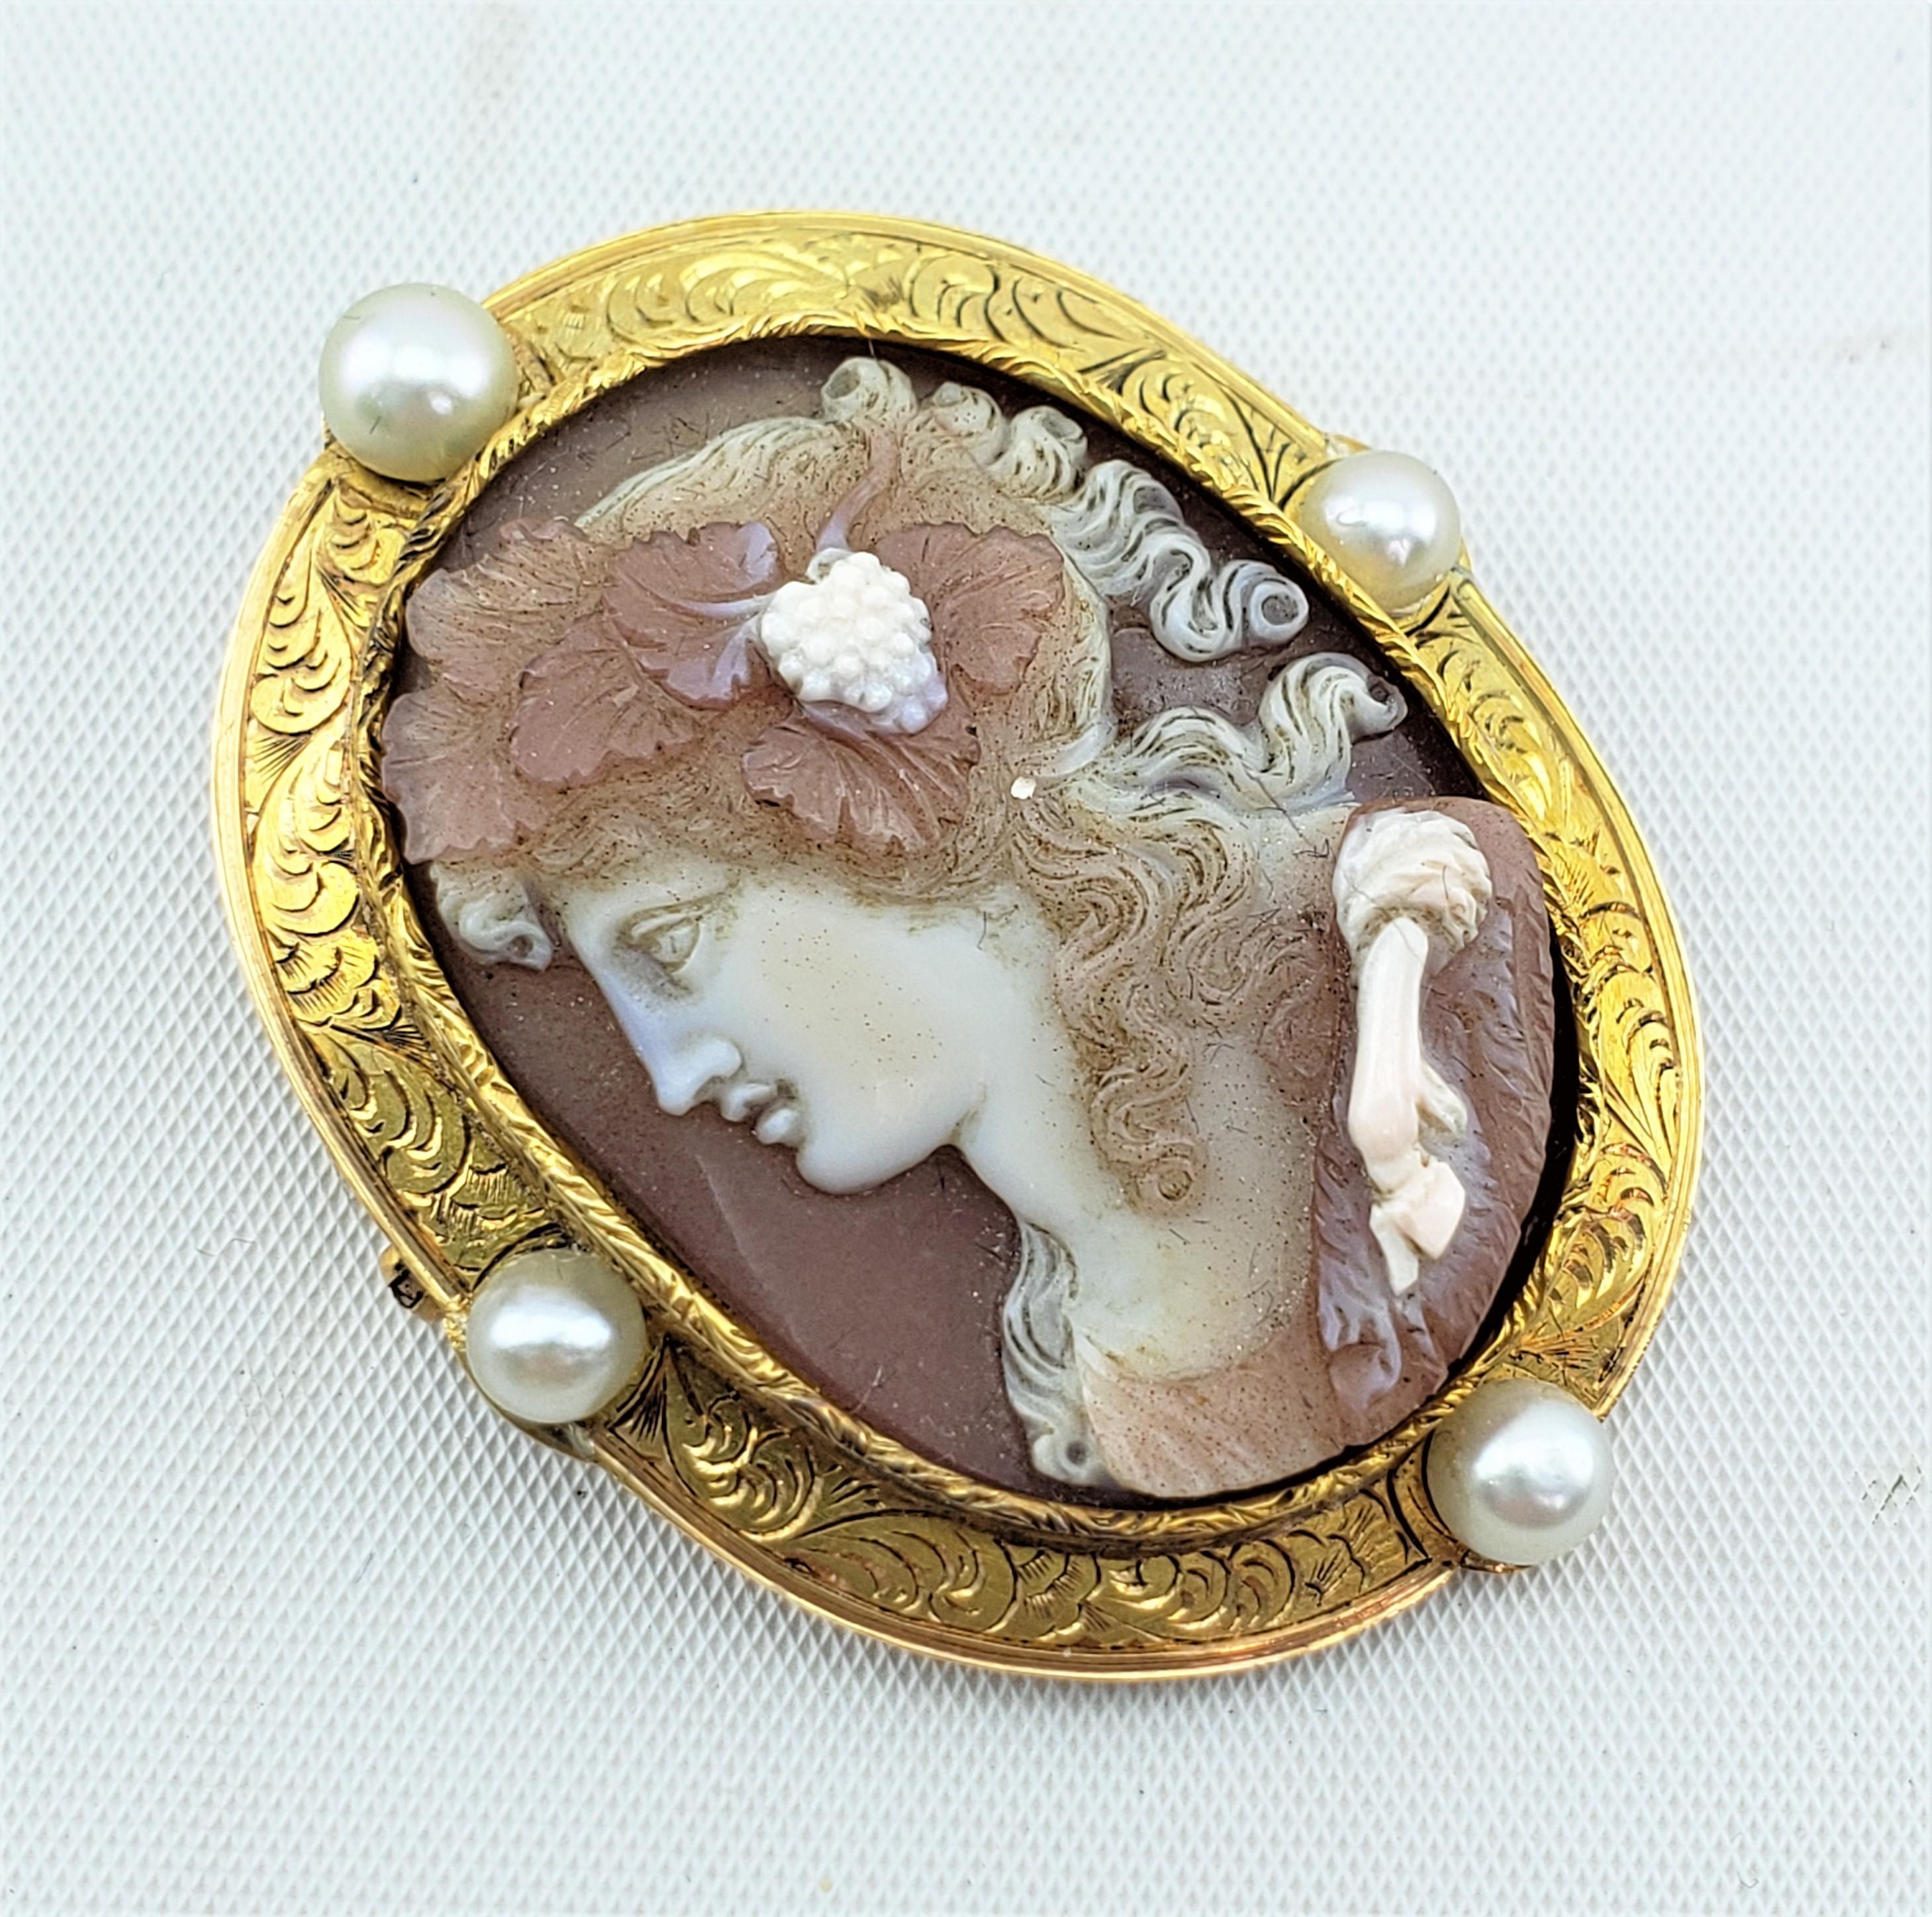 Italian Antique 18 Karat Engraved Yellow Gold & Hand-Carved Hardstone Cameo Brooch